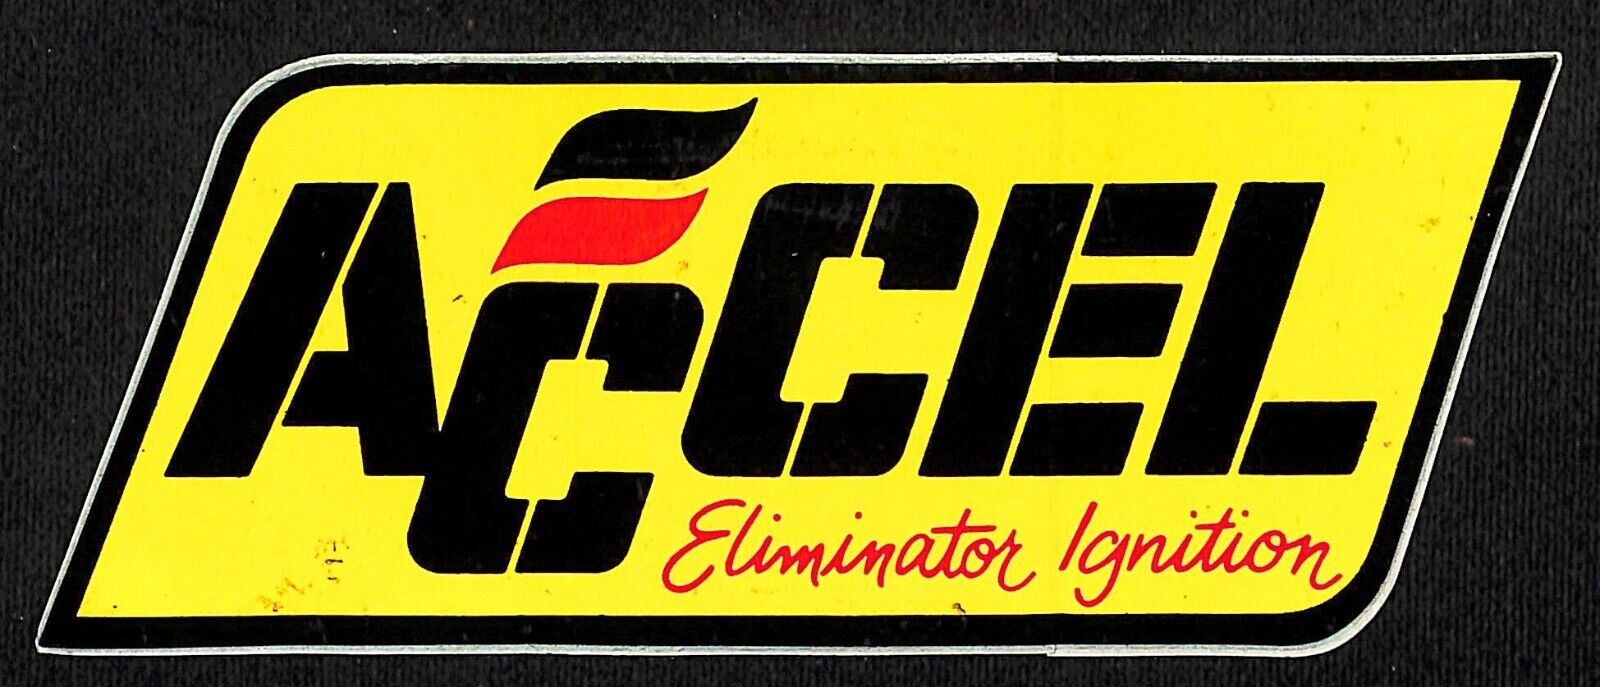 Accel Eliminator Ignition Racing Auto Sticker Decal c1970 2 3/8\